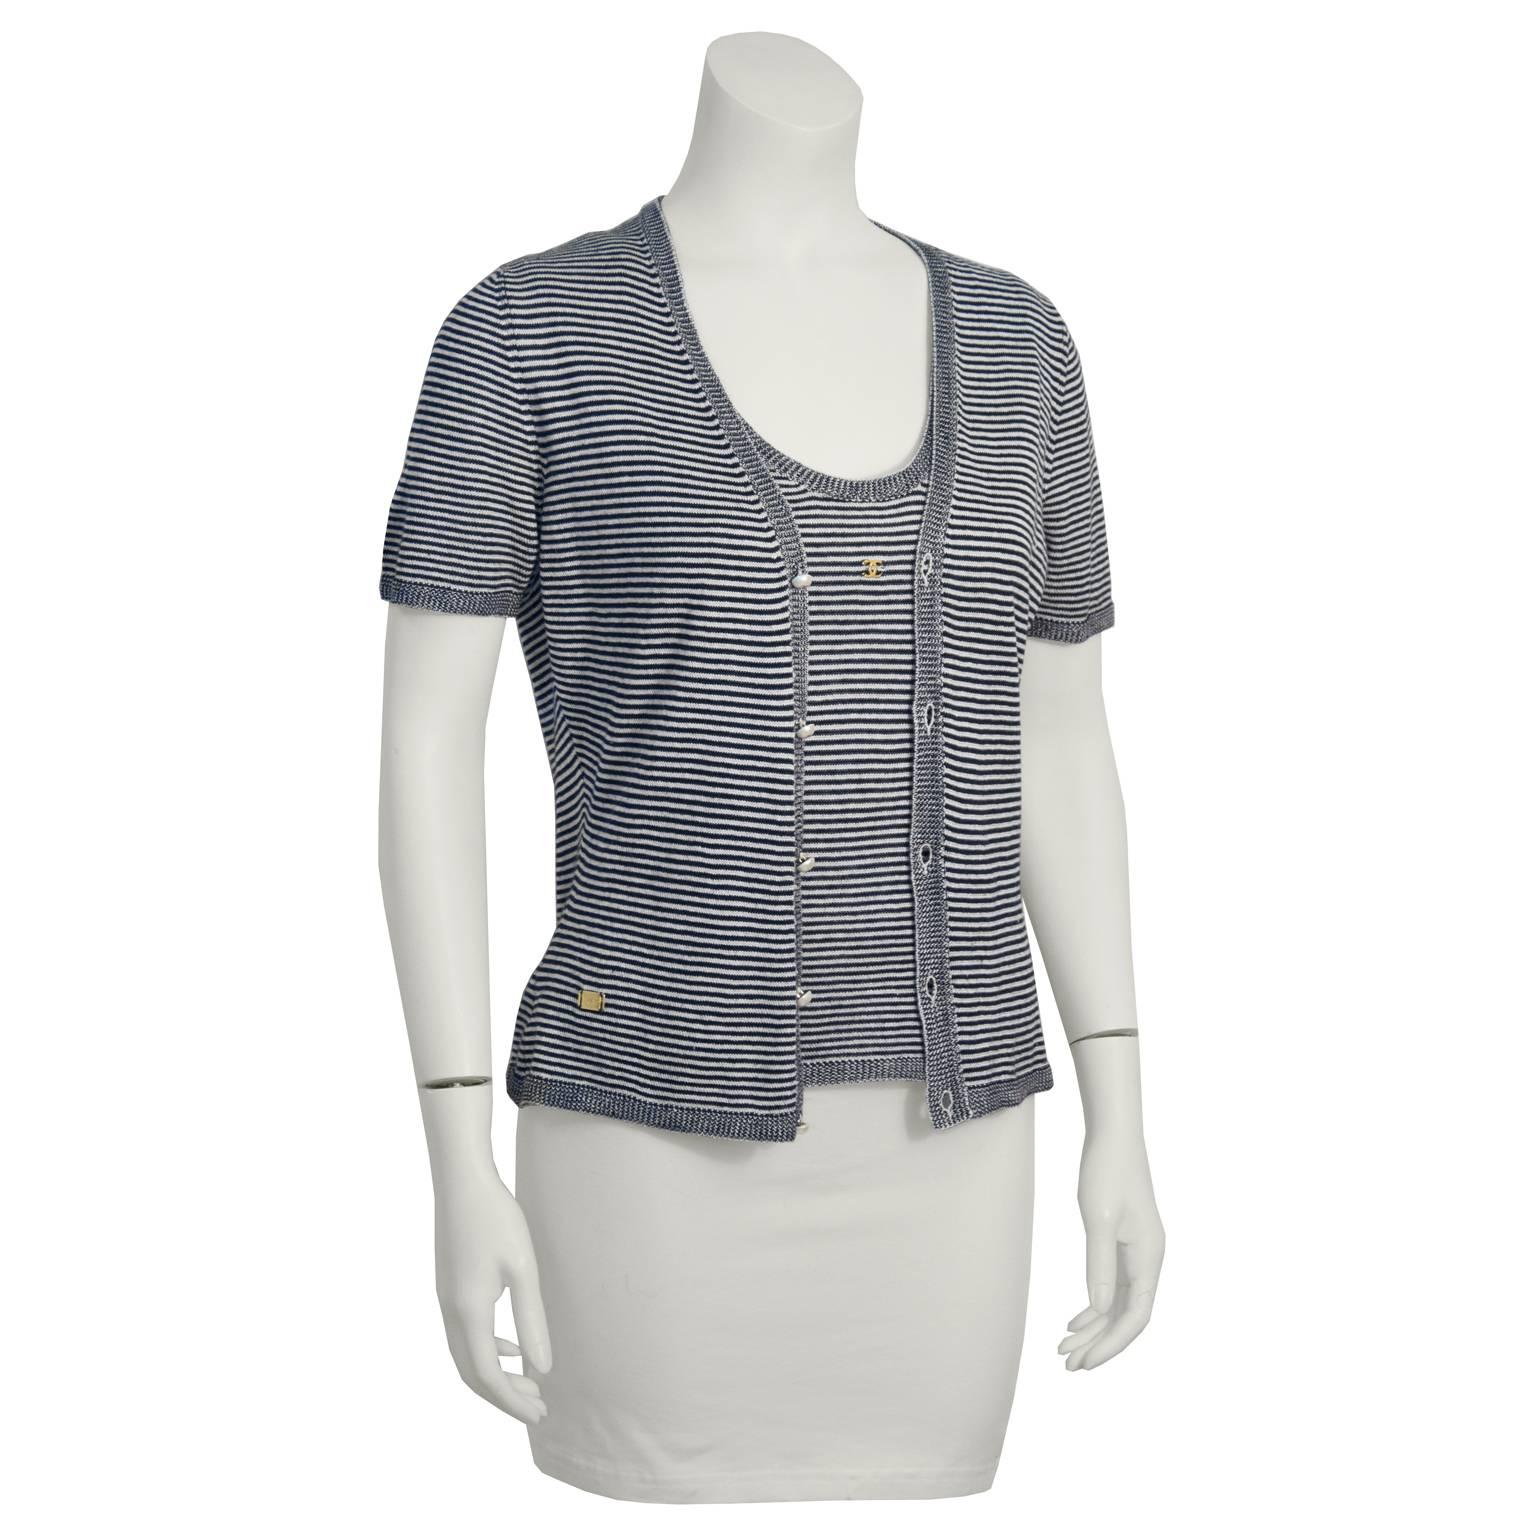 Casual chic 1990's Chanel striped knit twin set in navy and white. Tank top has a small gold CC on the chest.  Short sleeved cardigan has a front button closure and a small gold Chanel tag on the hip. Pearl buttons have gold CC logo on them.